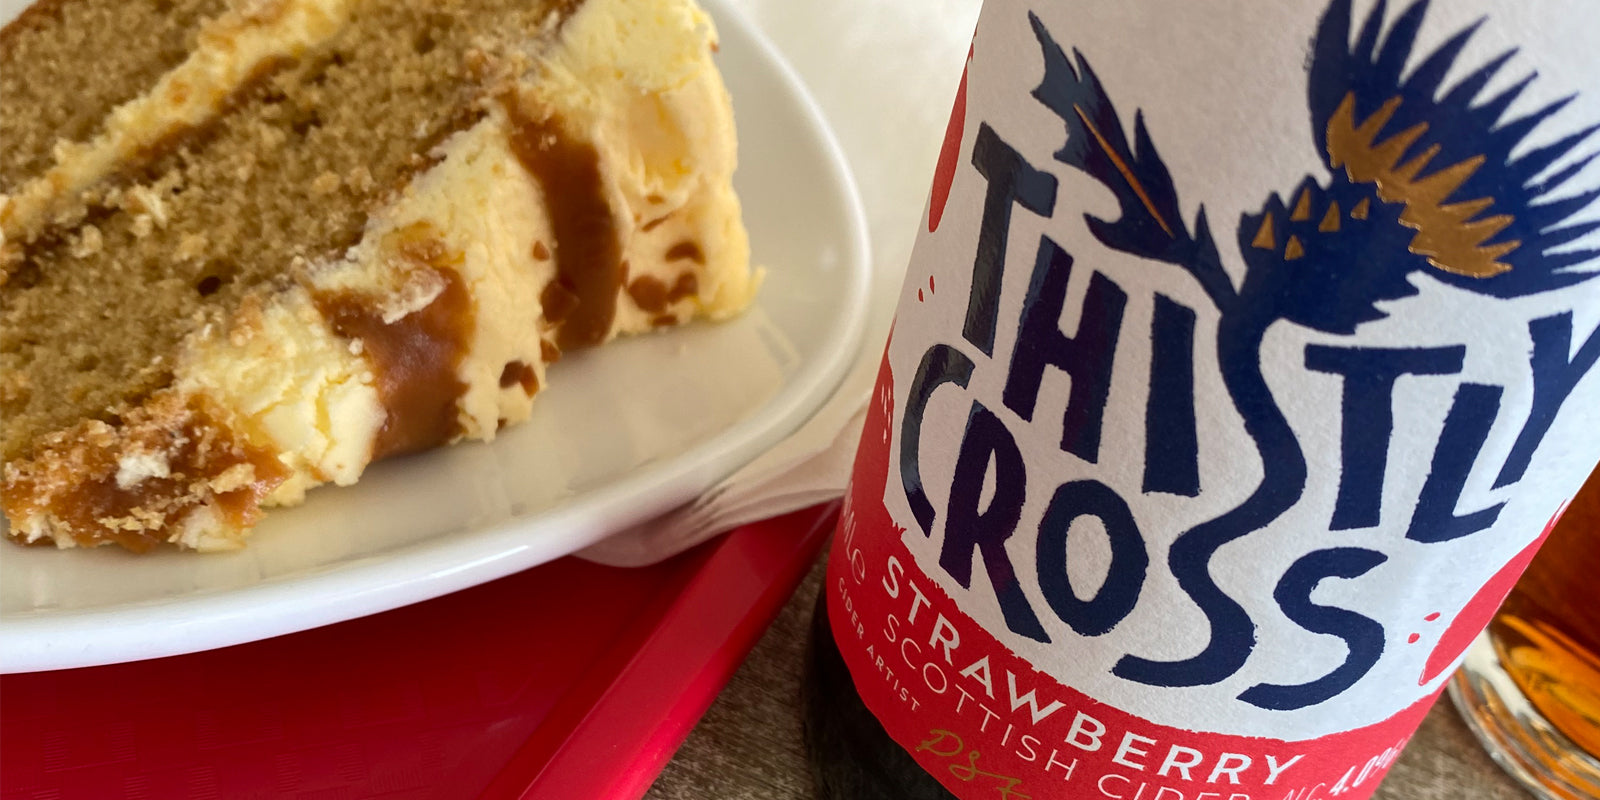 Schotse Sticky toffee pudding cake and Thistly Cross Strawberry Scottish Cider